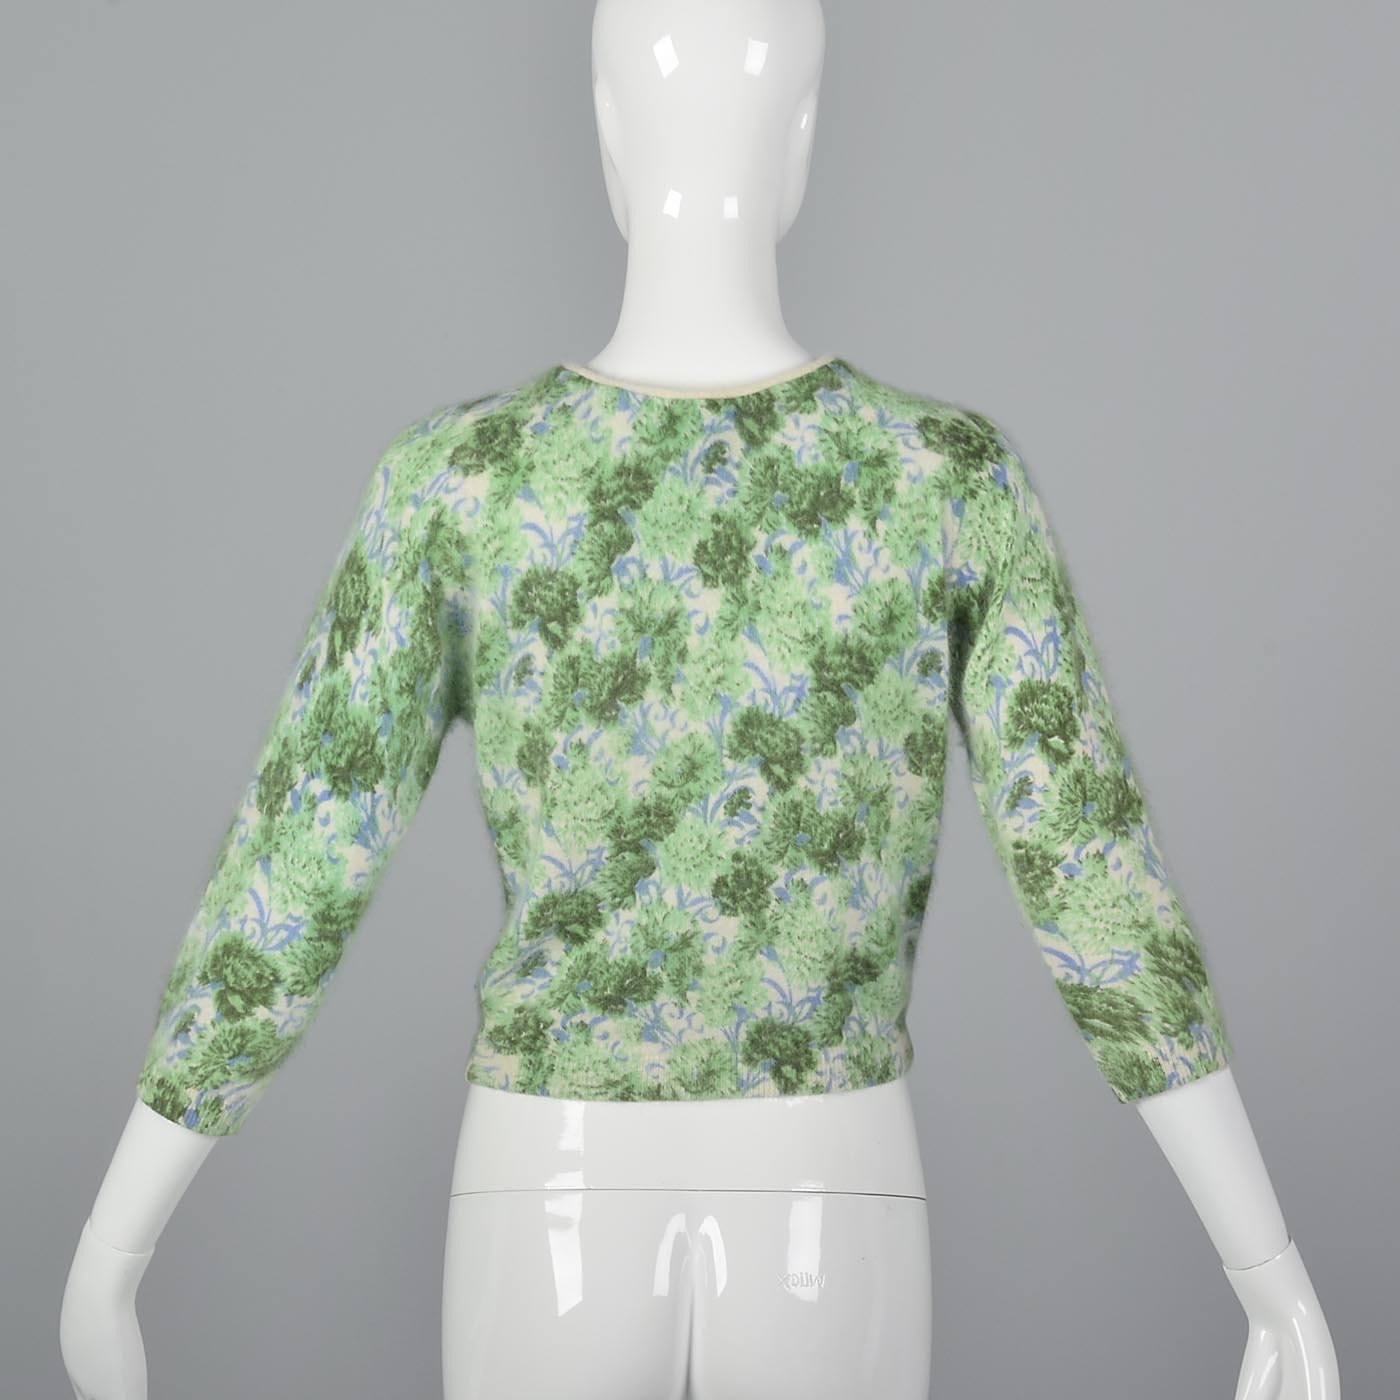 1960s Green and Blue Floral Print Angora Sweater